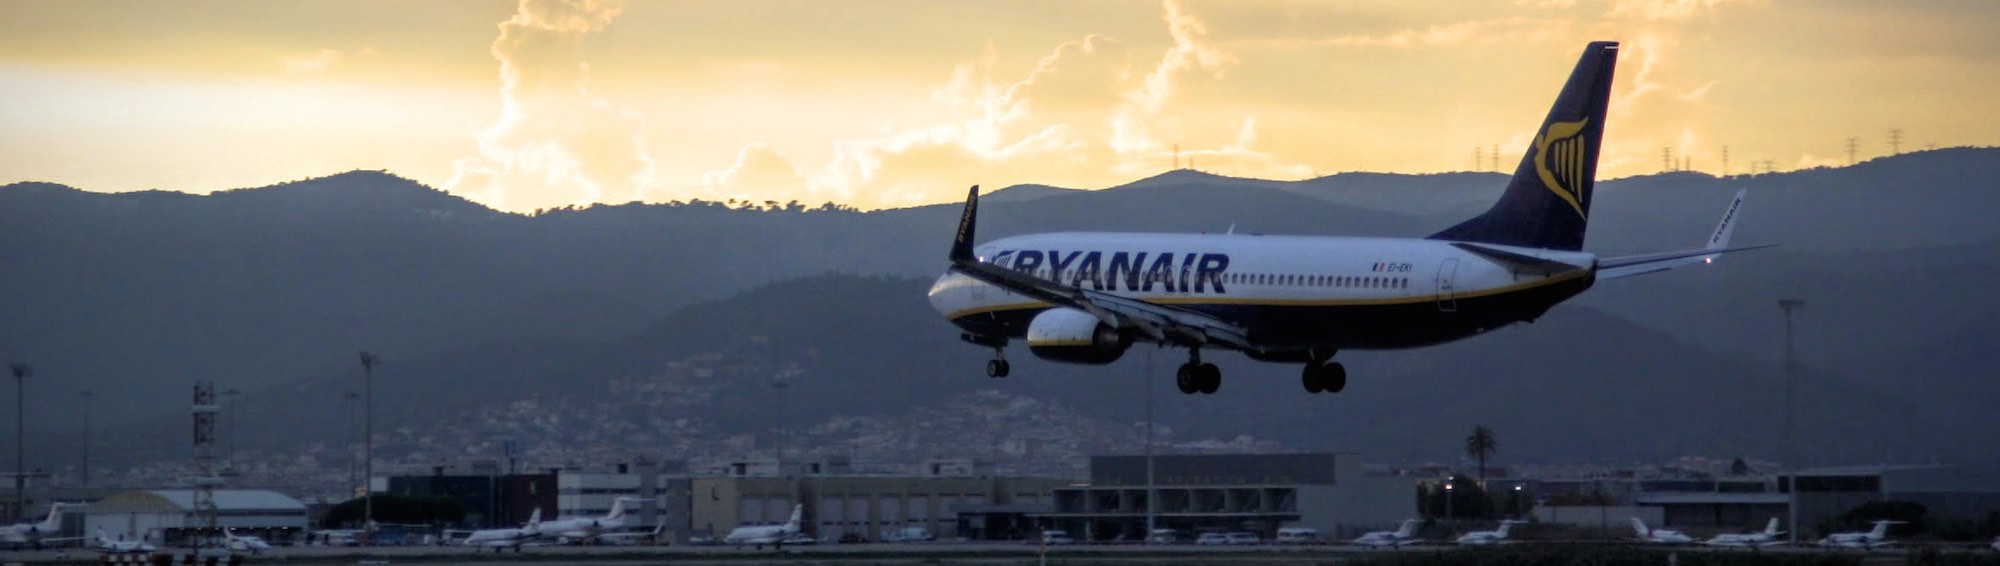 Best time to book flights for Funchal (FNC) to Porto (OPO) flights with Ryanair at AirHint